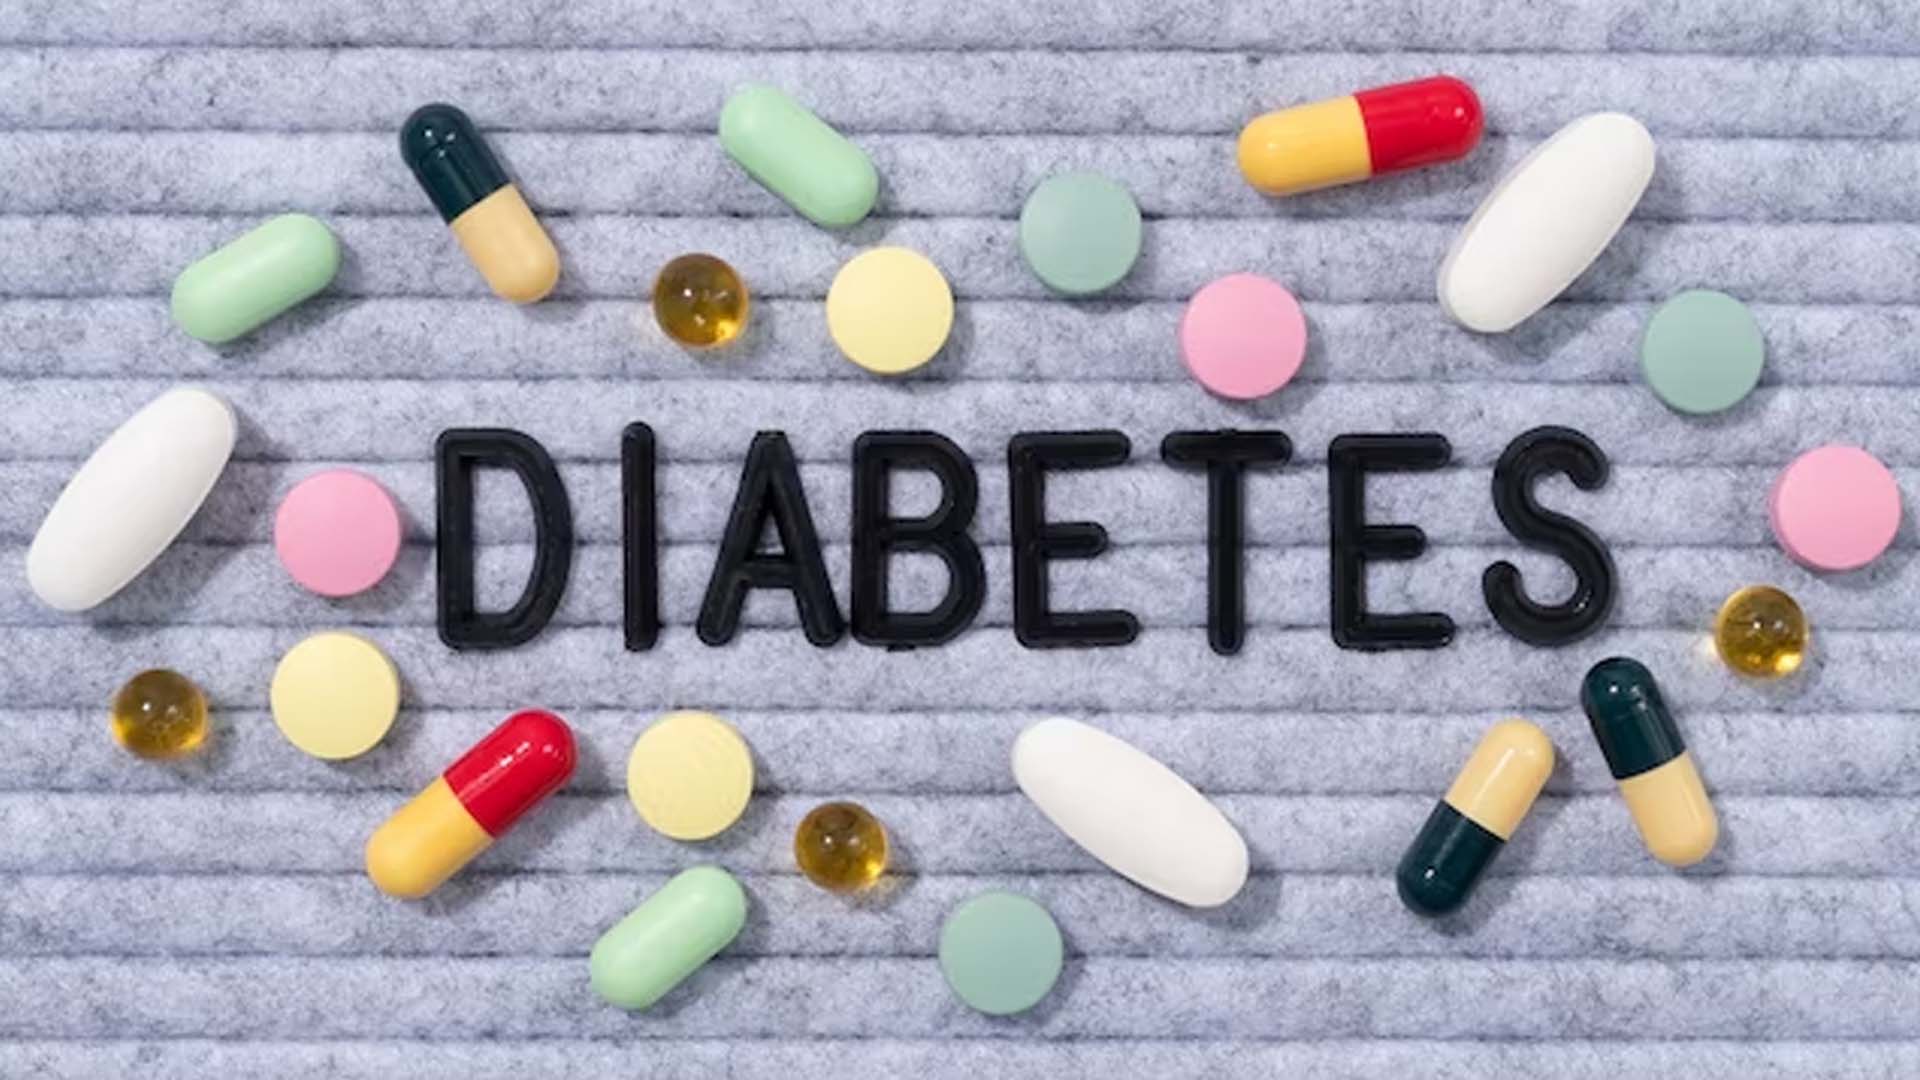 Does Diabetes Cause Weight Loss?